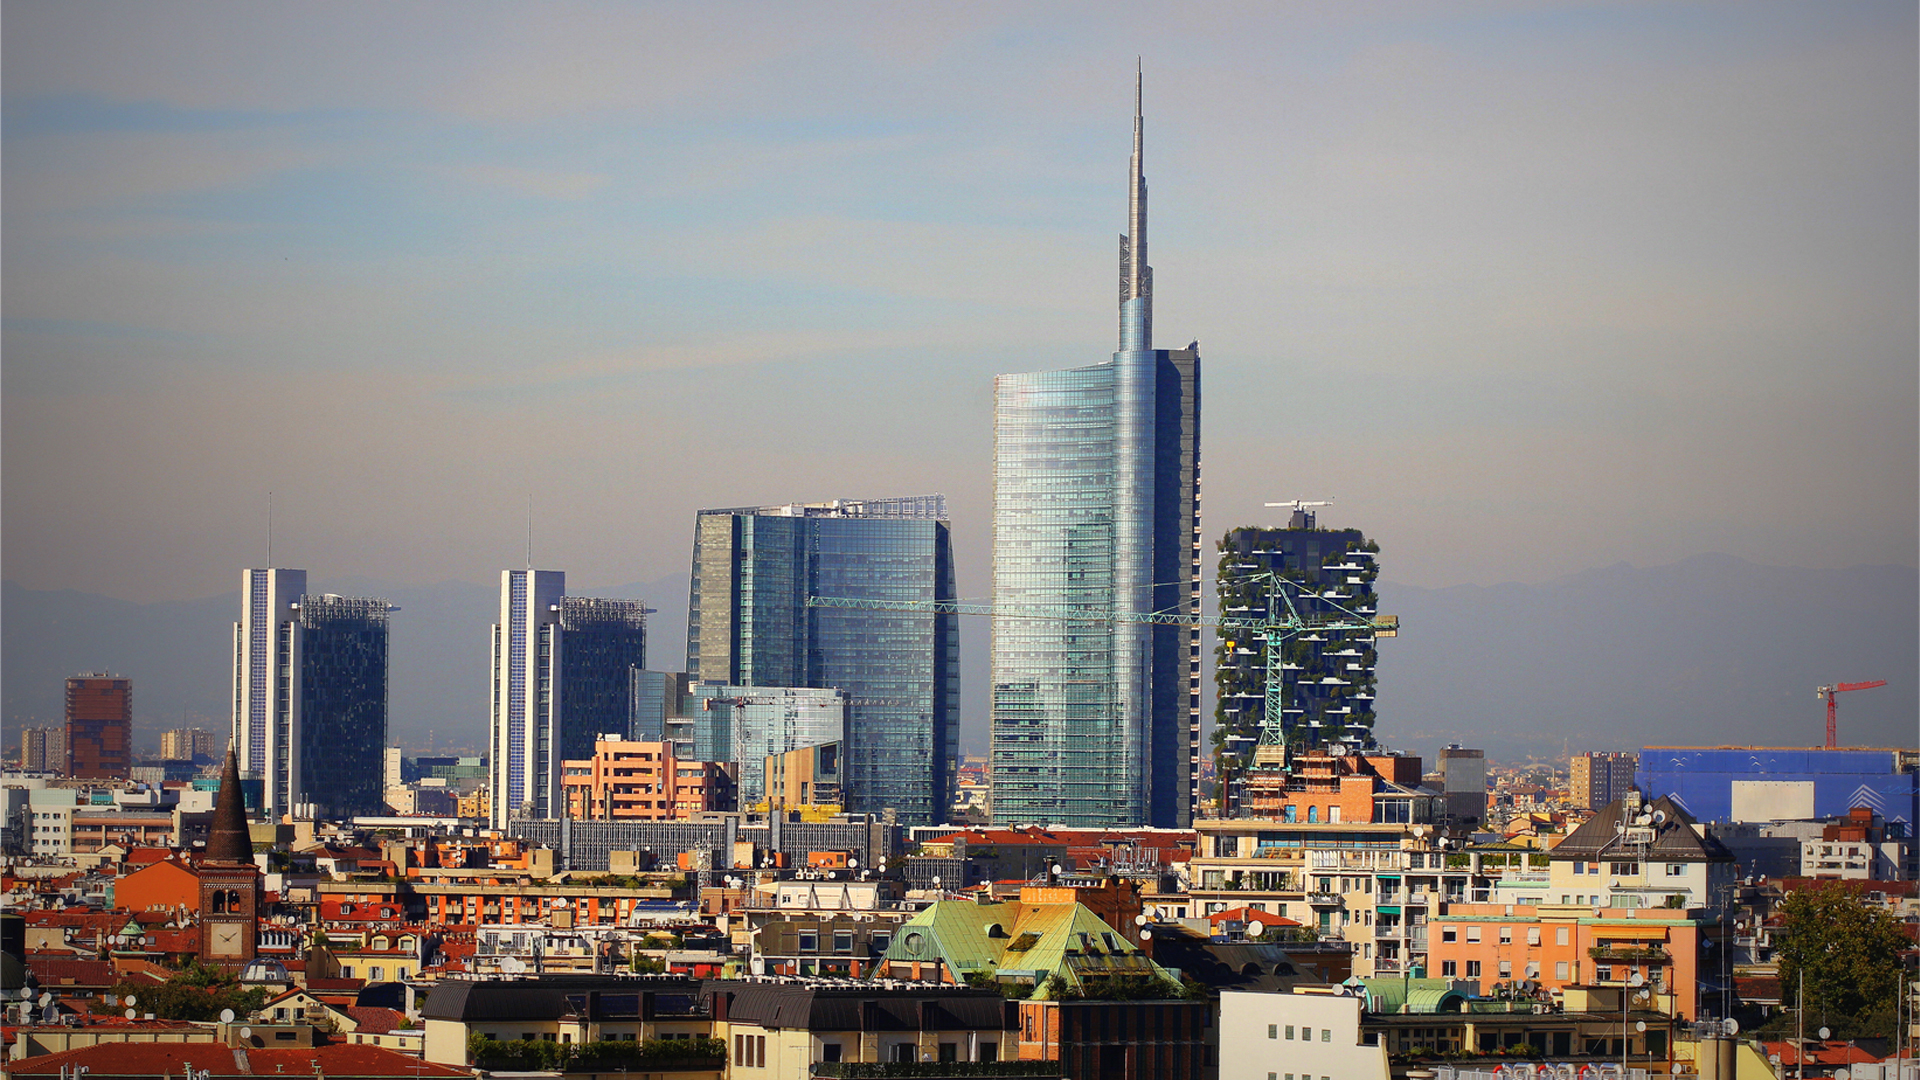 Milan skyline with modern skyscrapers in Porto Nuovo business district, Italy Image